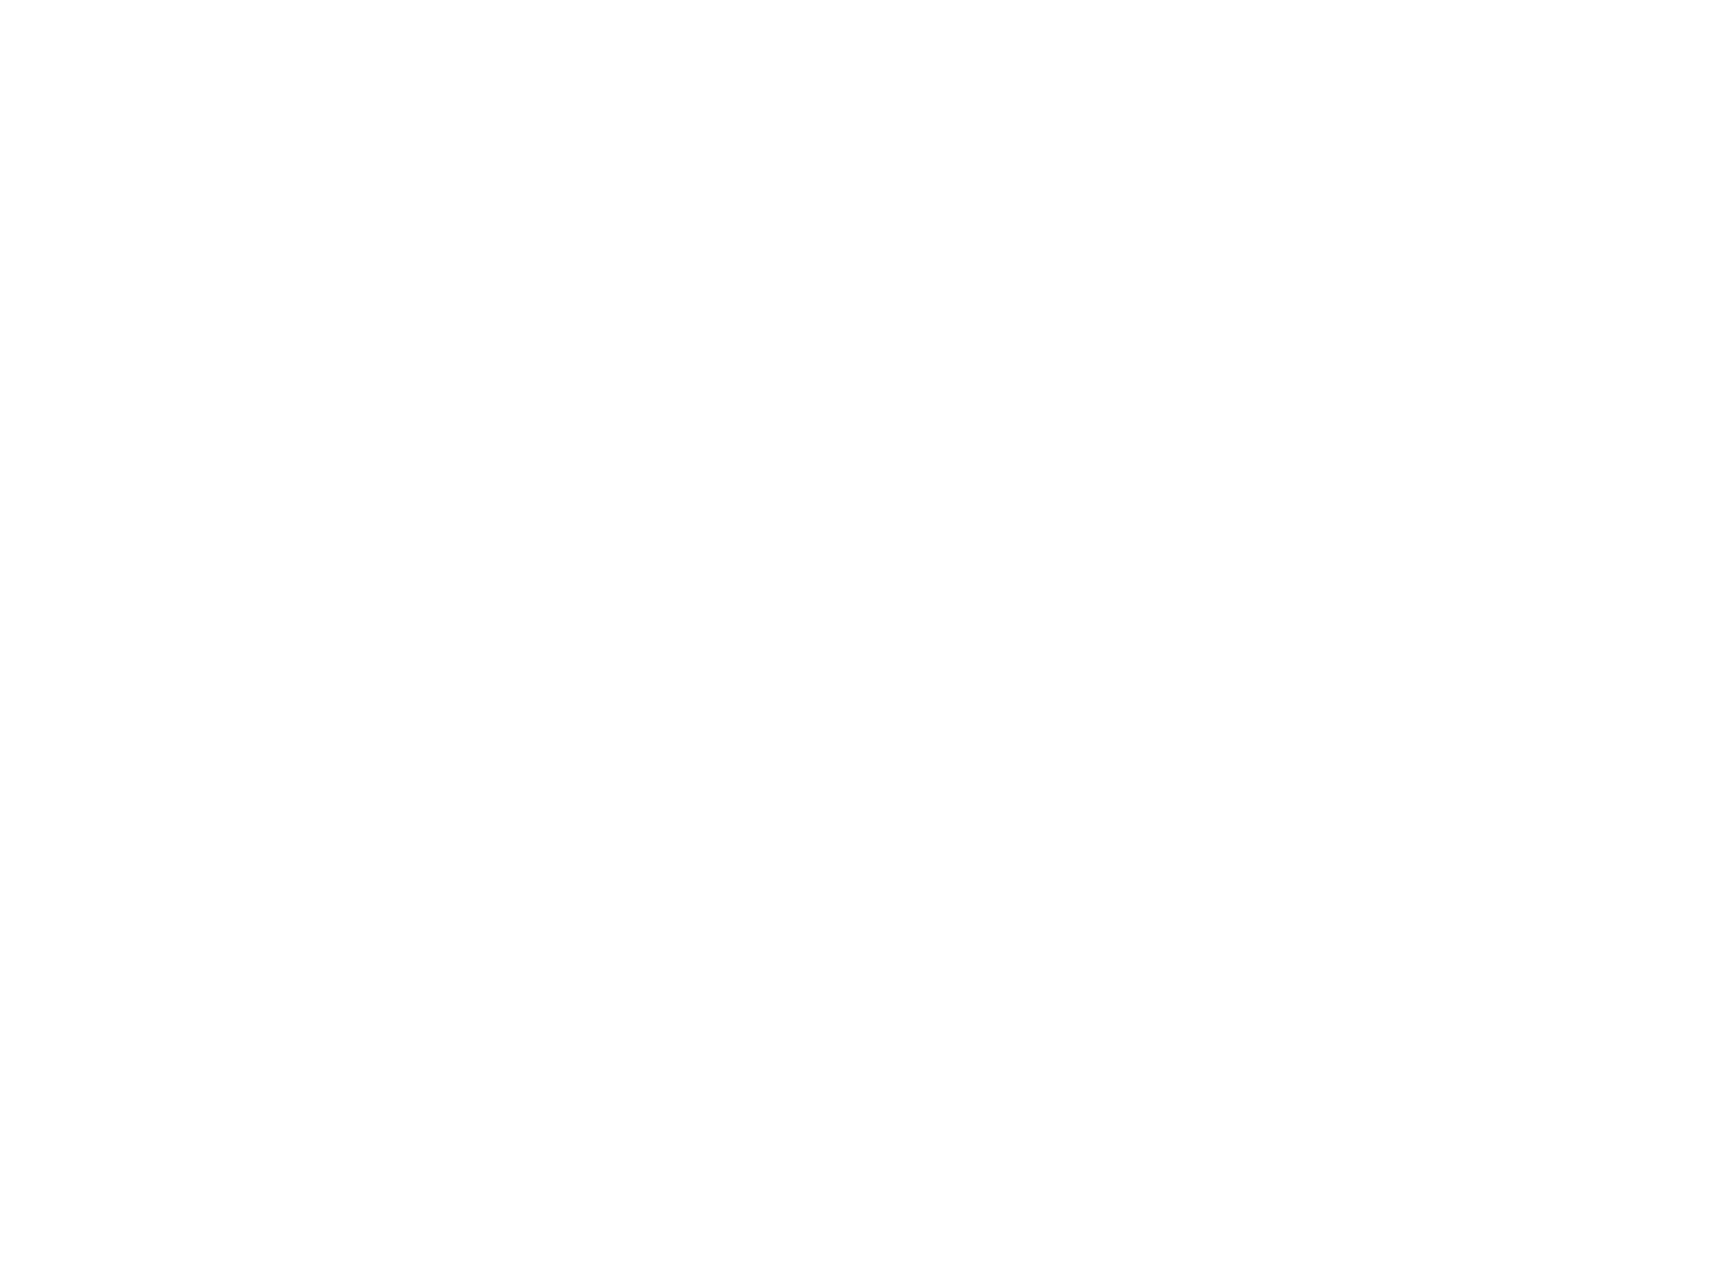 If it's not loaded, its not us